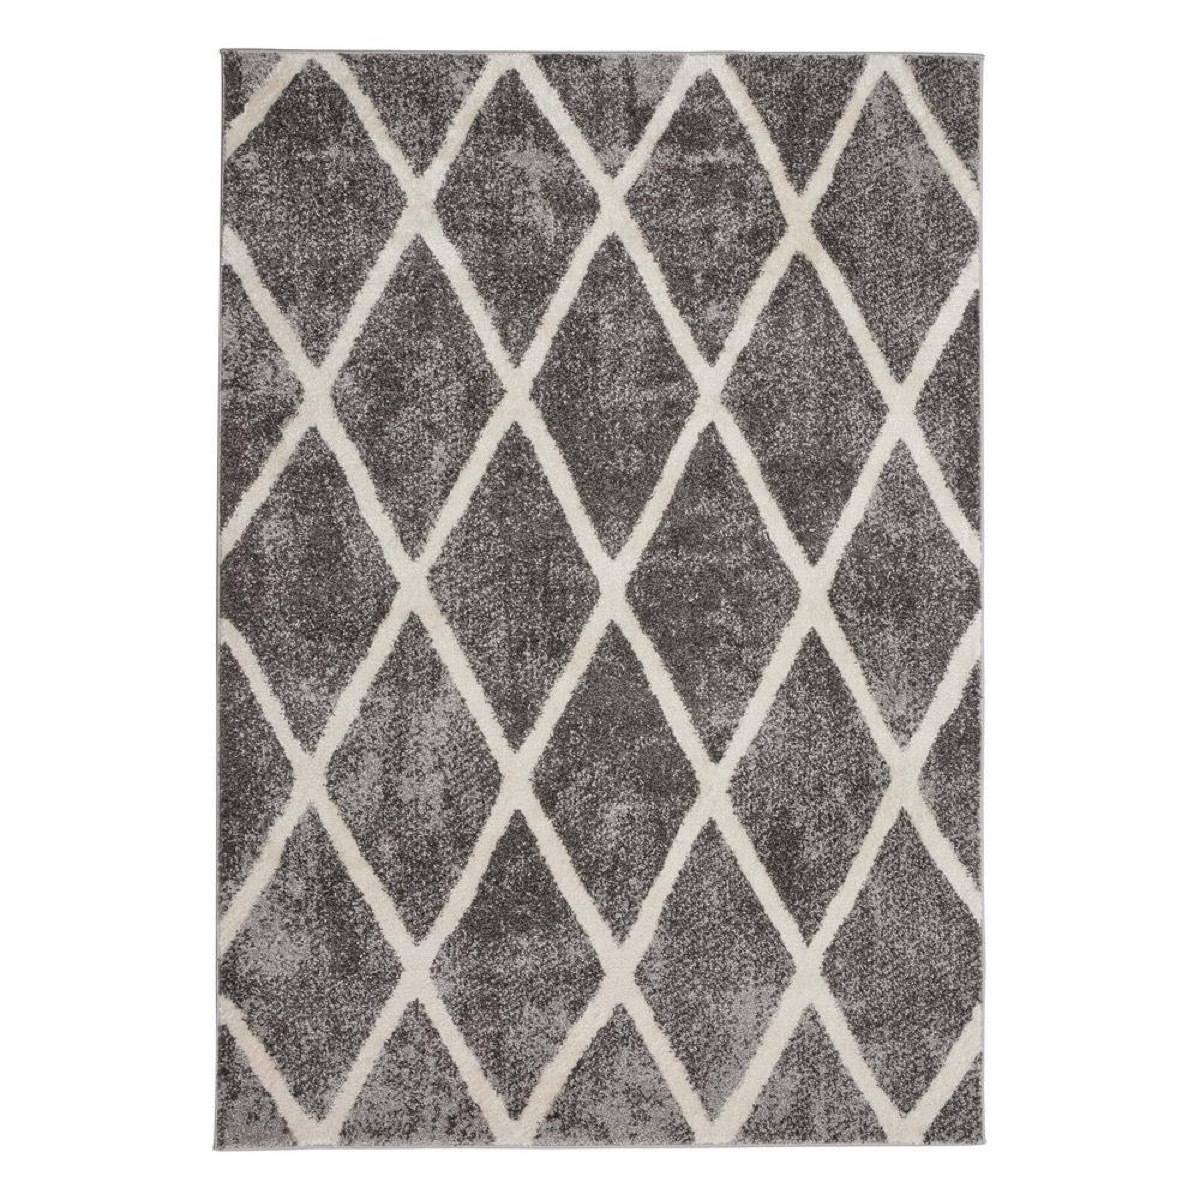 Gray diamond rug from The Home Depot